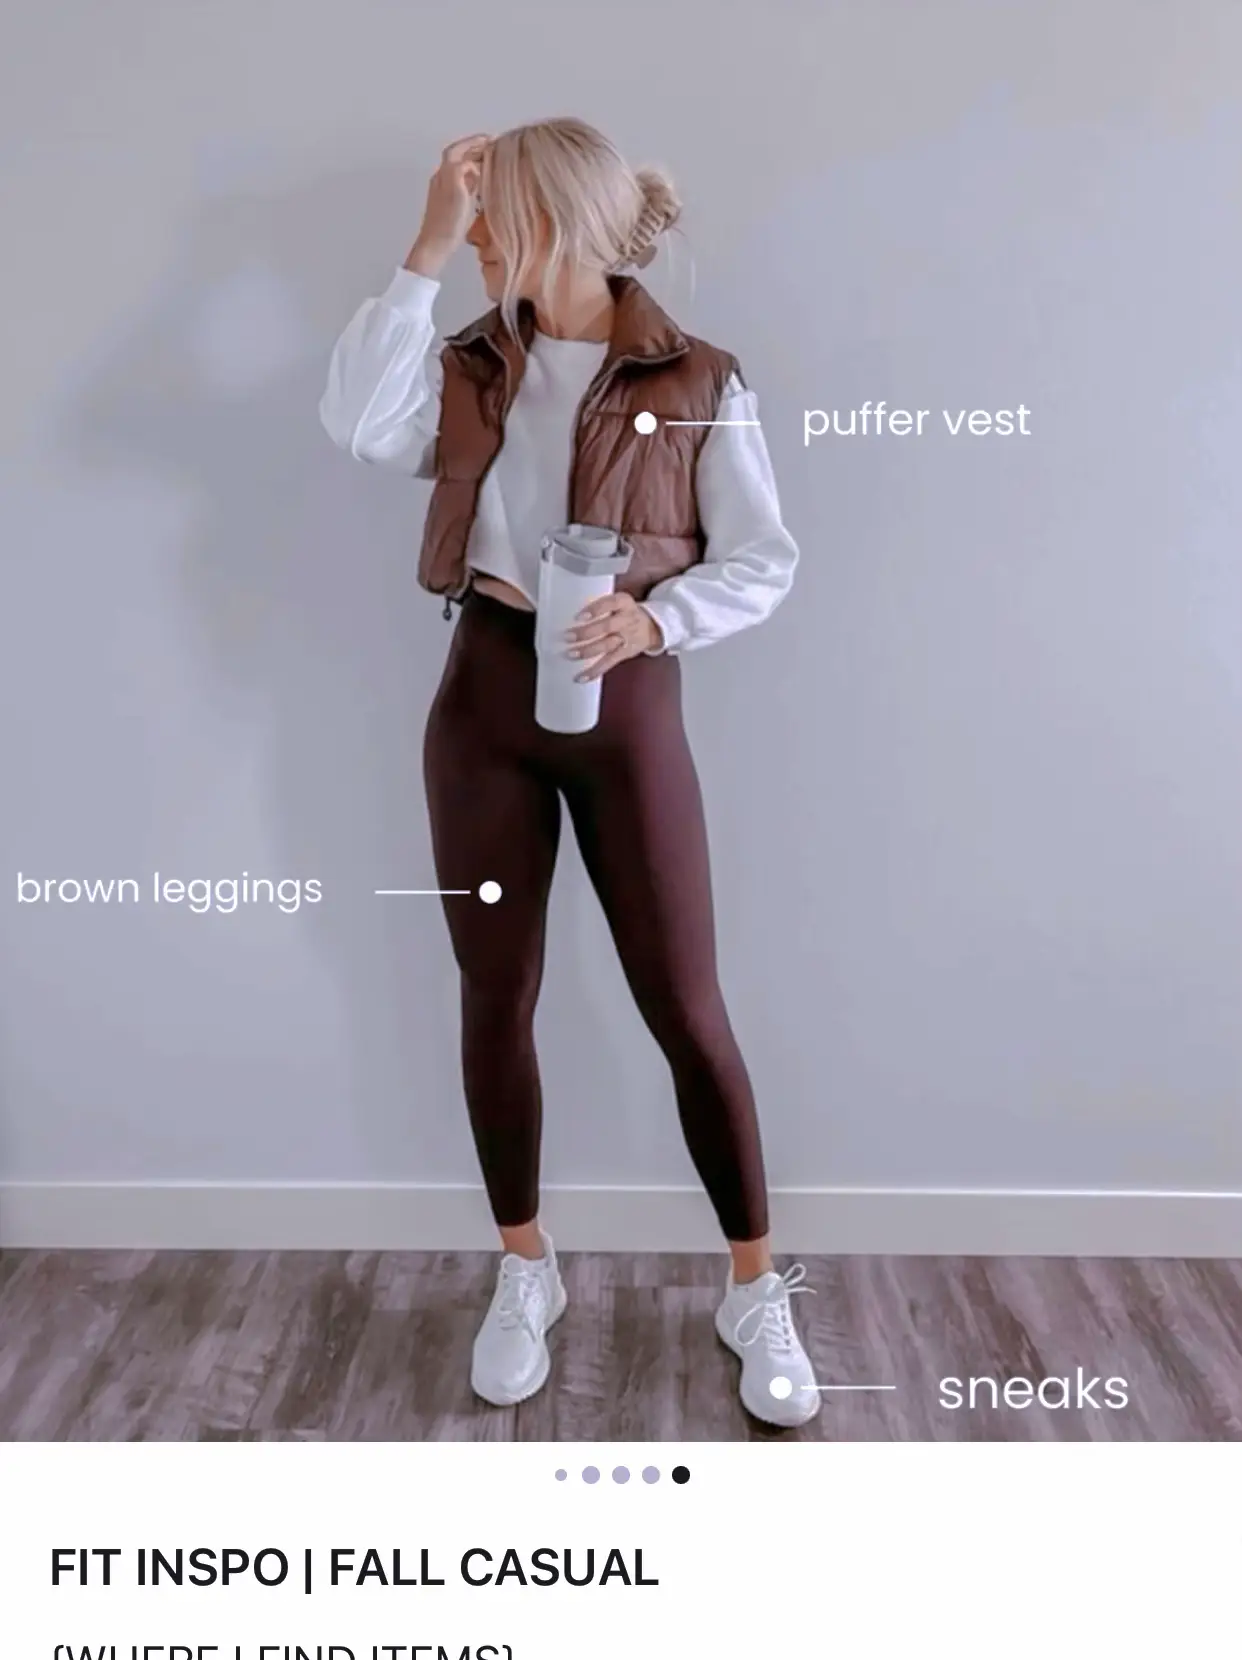 Fall outfits. Comfy casual. Brown leggings. Puffer vest. Fall aesthetic. On  cloud.